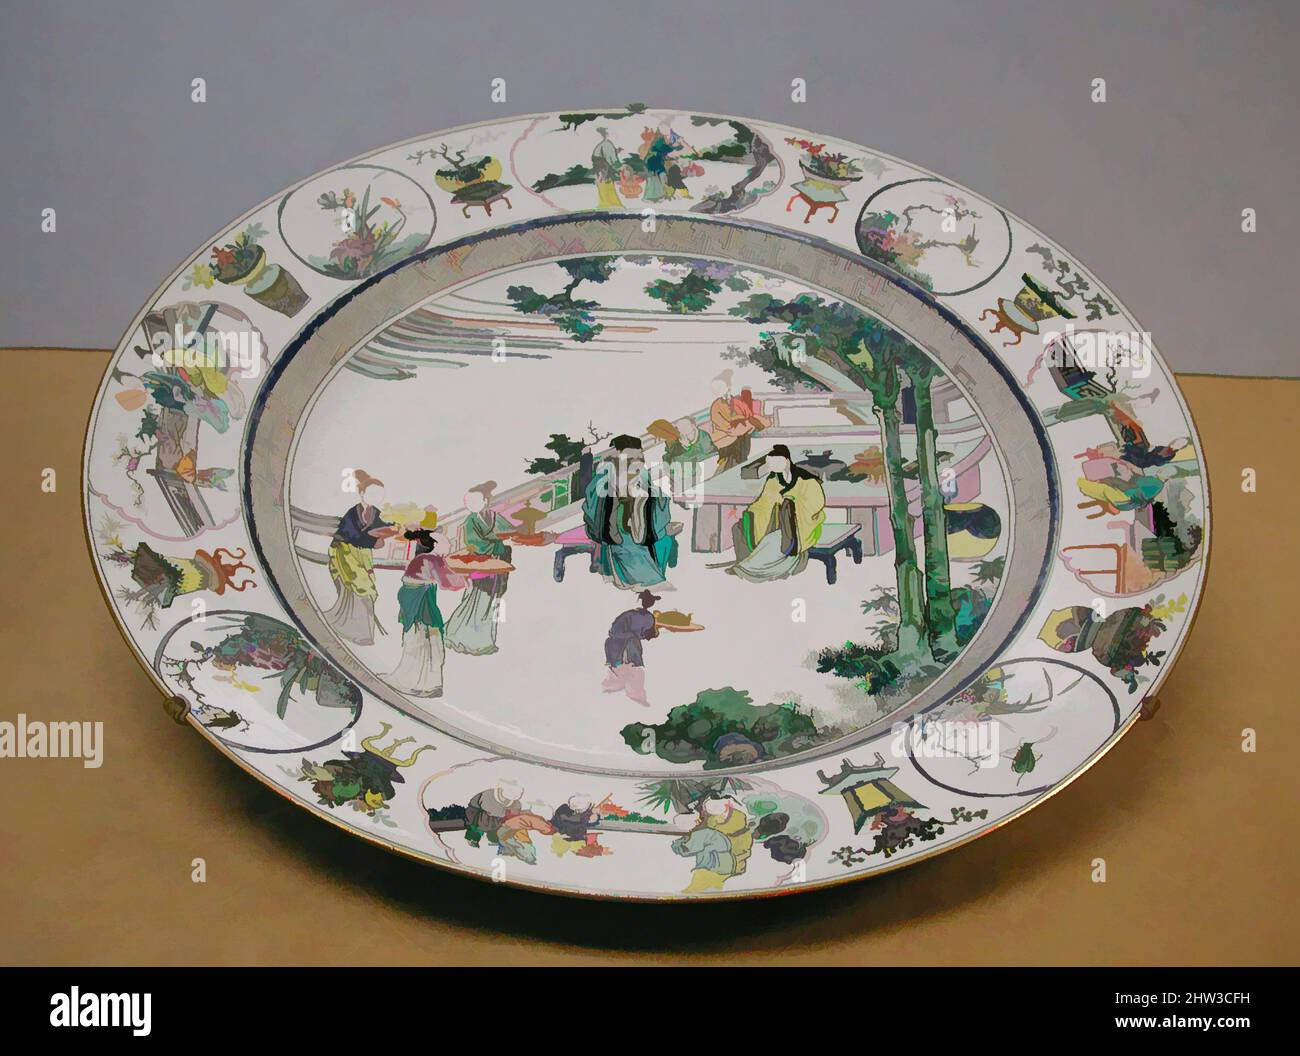 Art inspired by Plate with Scene of Offering Tribute, Qing dynasty (1644–1911), Yongzheng period (1723–35), early 18th century, China, Porcelain painted with colored enamels on the biscuit (Jingdezhen ware), H. 3 1/4 in. (8.3 cm); Diam. 21 7/8 in. (55.6 cm), Ceramics, The imagery on, Classic works modernized by Artotop with a splash of modernity. Shapes, color and value, eye-catching visual impact on art. Emotions through freedom of artworks in a contemporary way. A timeless message pursuing a wildly creative new direction. Artists turning to the digital medium and creating the Artotop NFT Stock Photo